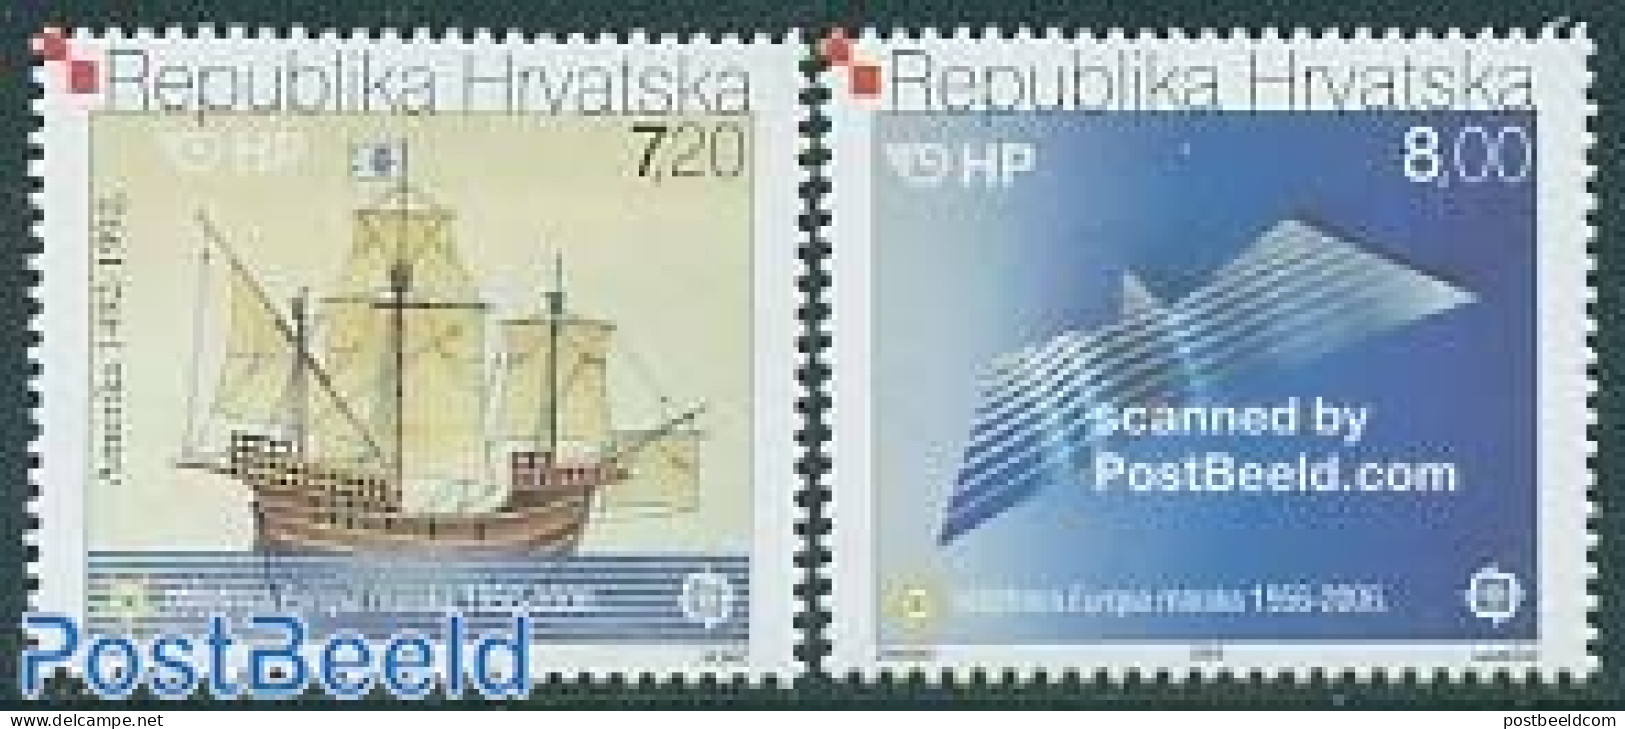 Croatia 2005 50 Years Europa Stamps 2v, Mint NH, History - Transport - Europa Hang-on Issues - Ships And Boats - Idées Européennes